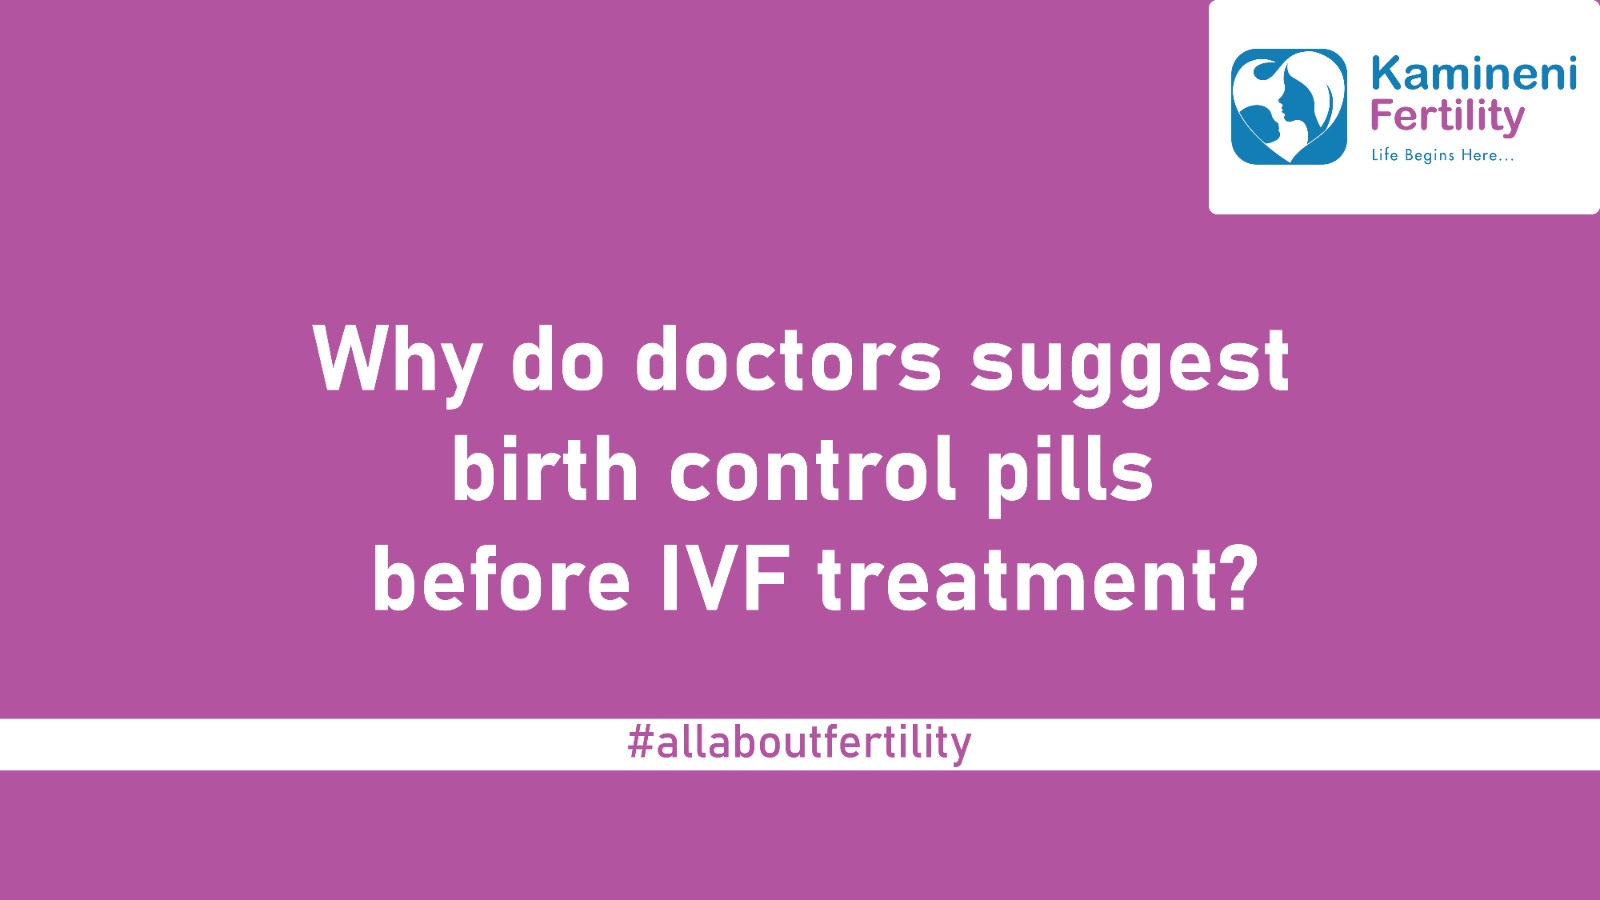 Why do we suggest birth control pills in IVF treatment?